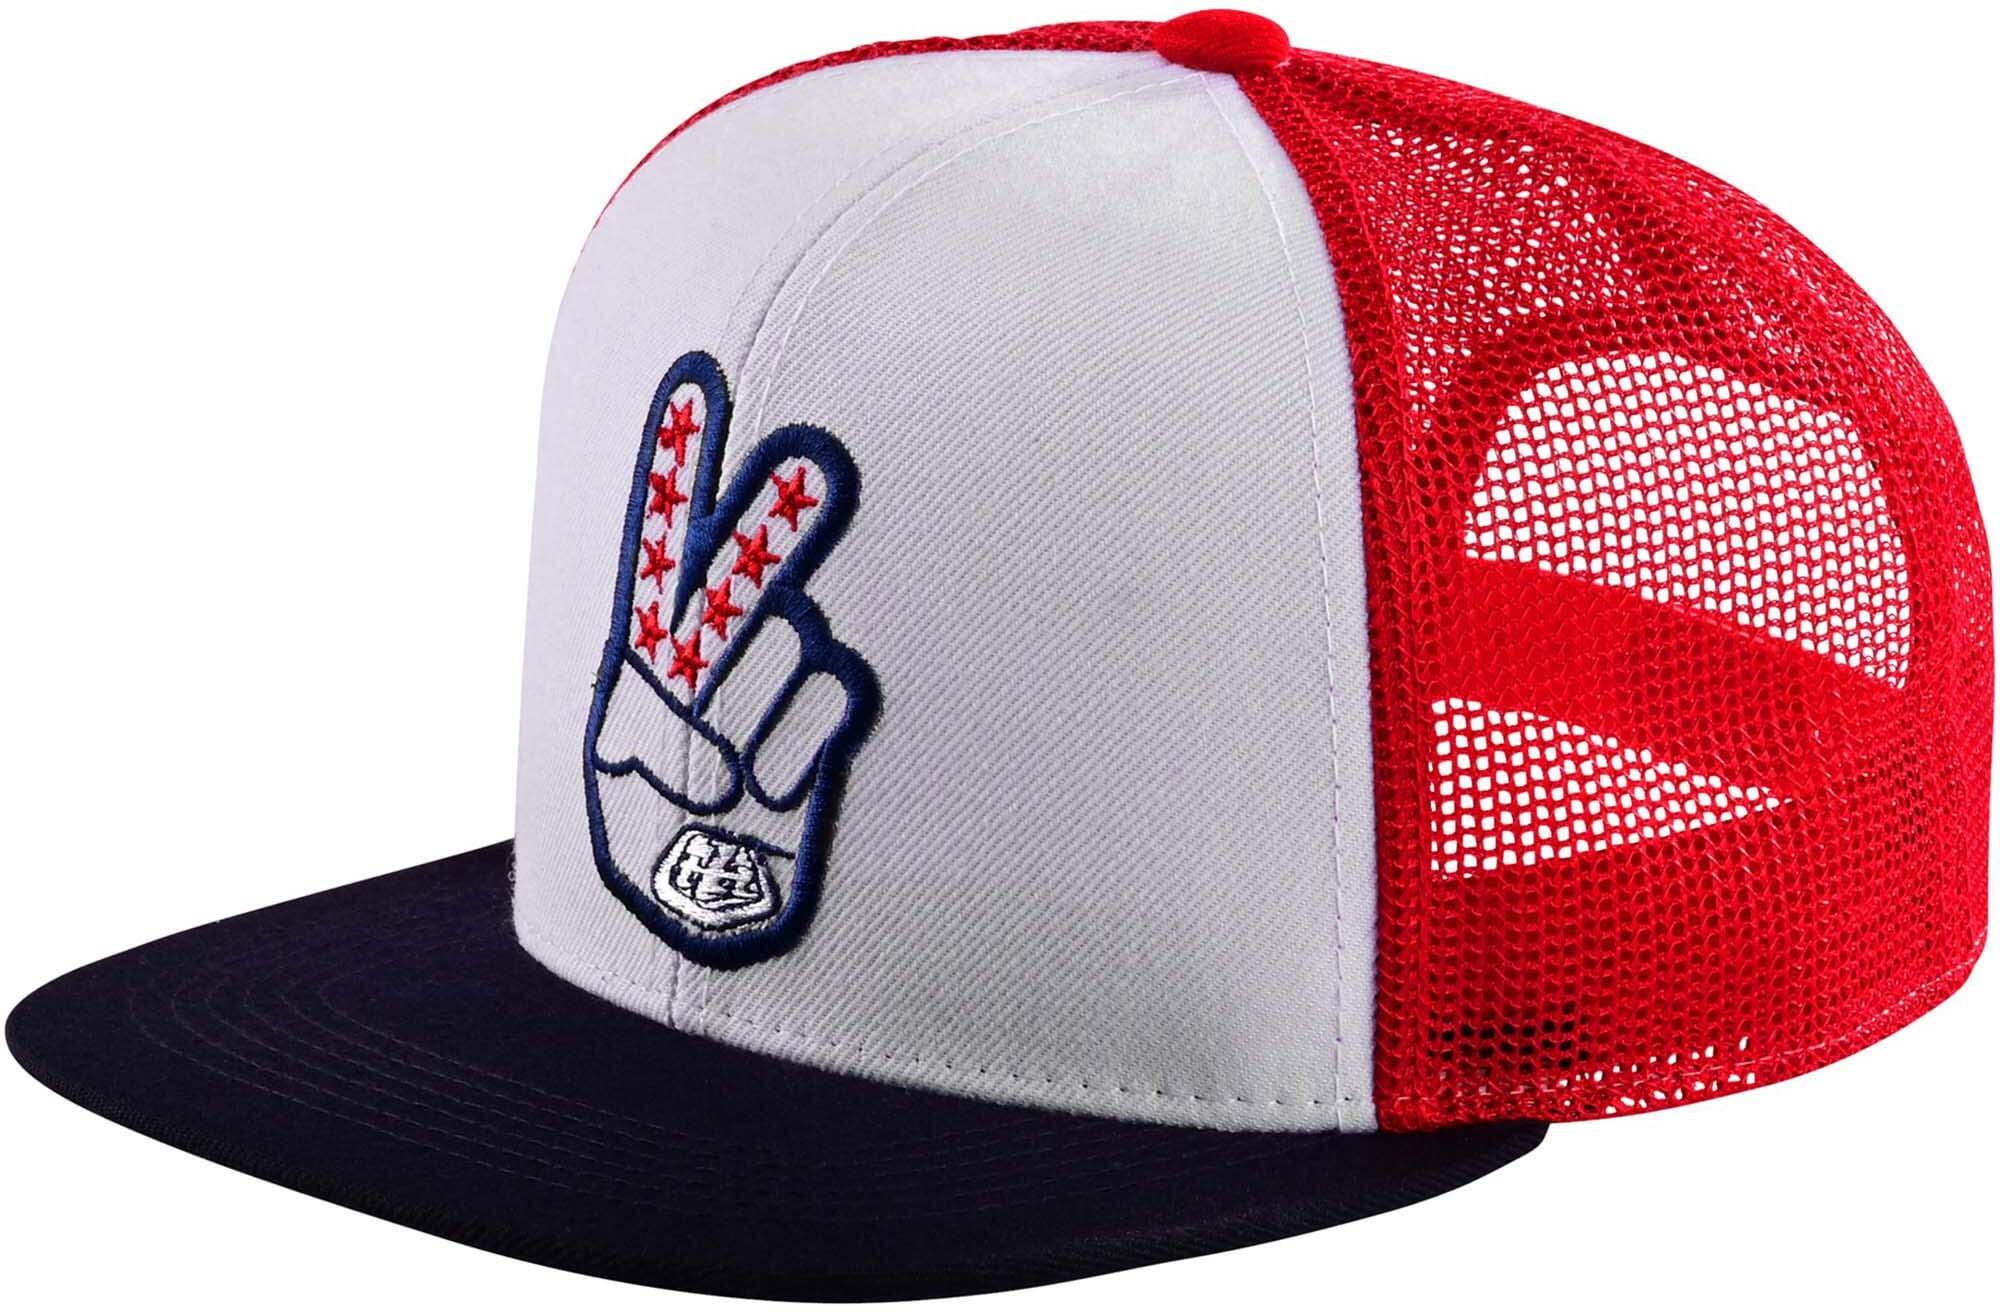 Troy Lee Designs Trucker Snapback Hat - Peace Out Red/white